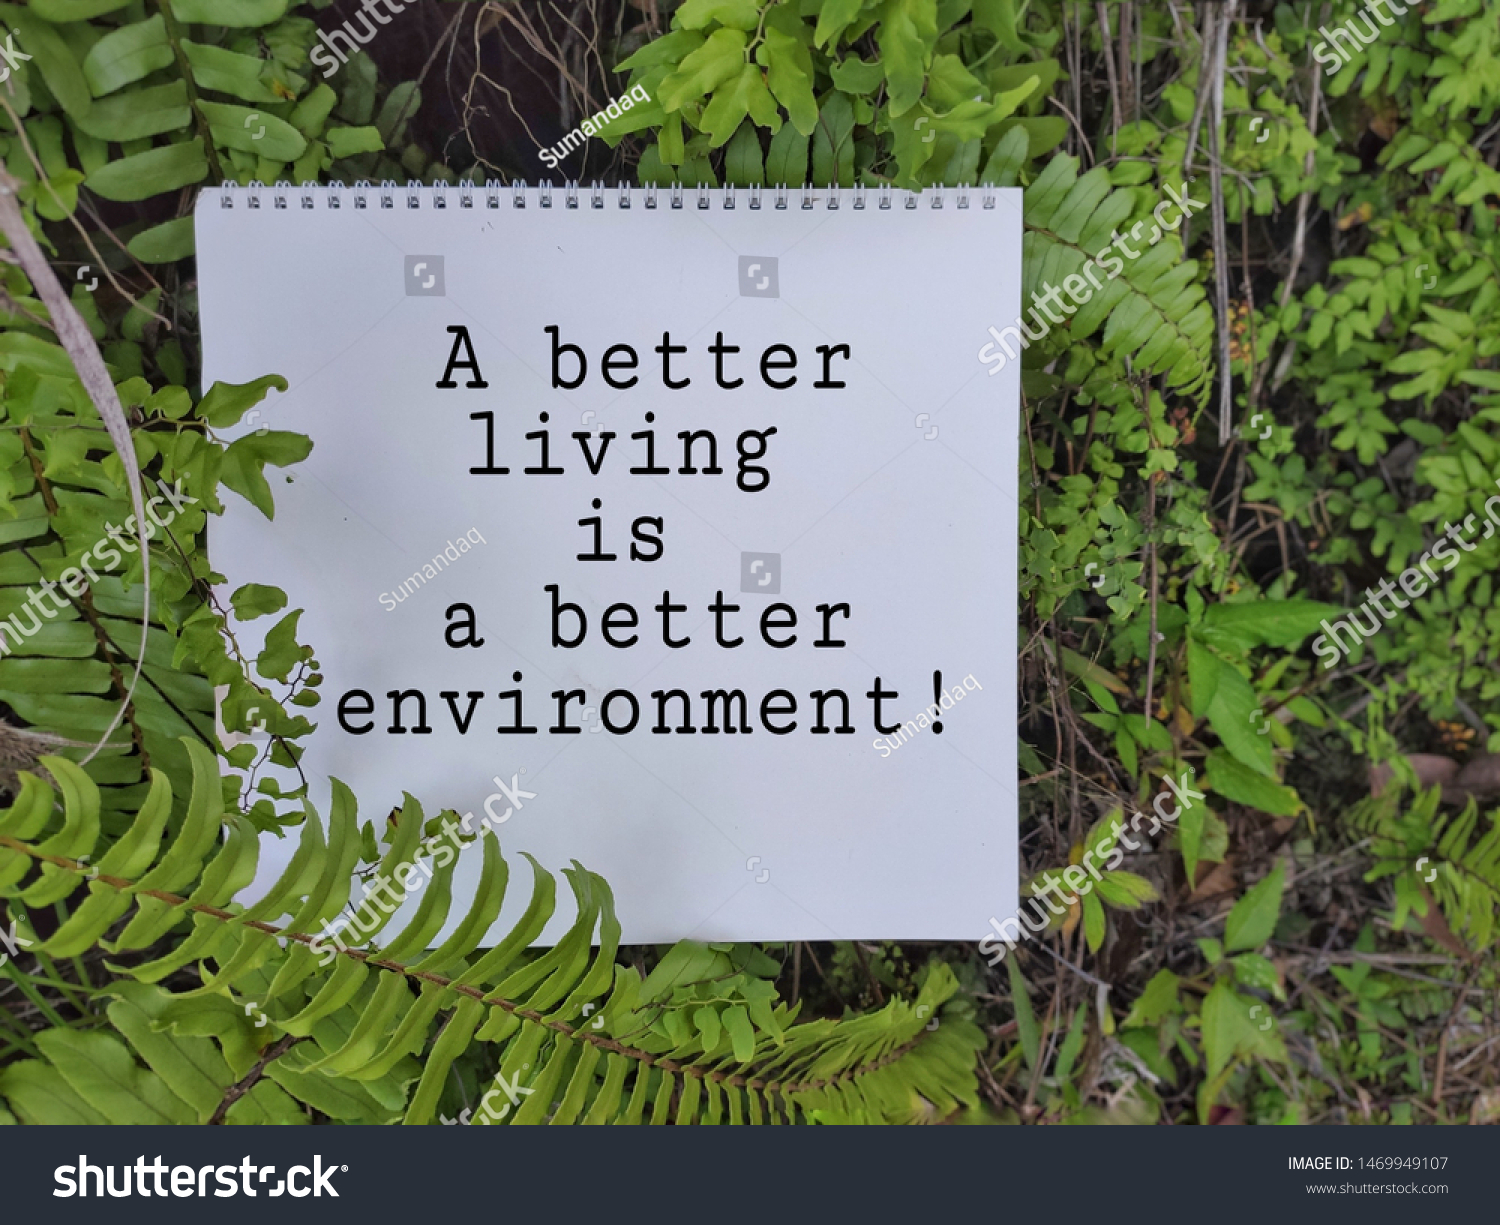 motivational and inspirational words of a better living is a better environment on notepad with green leaves background #1469949107